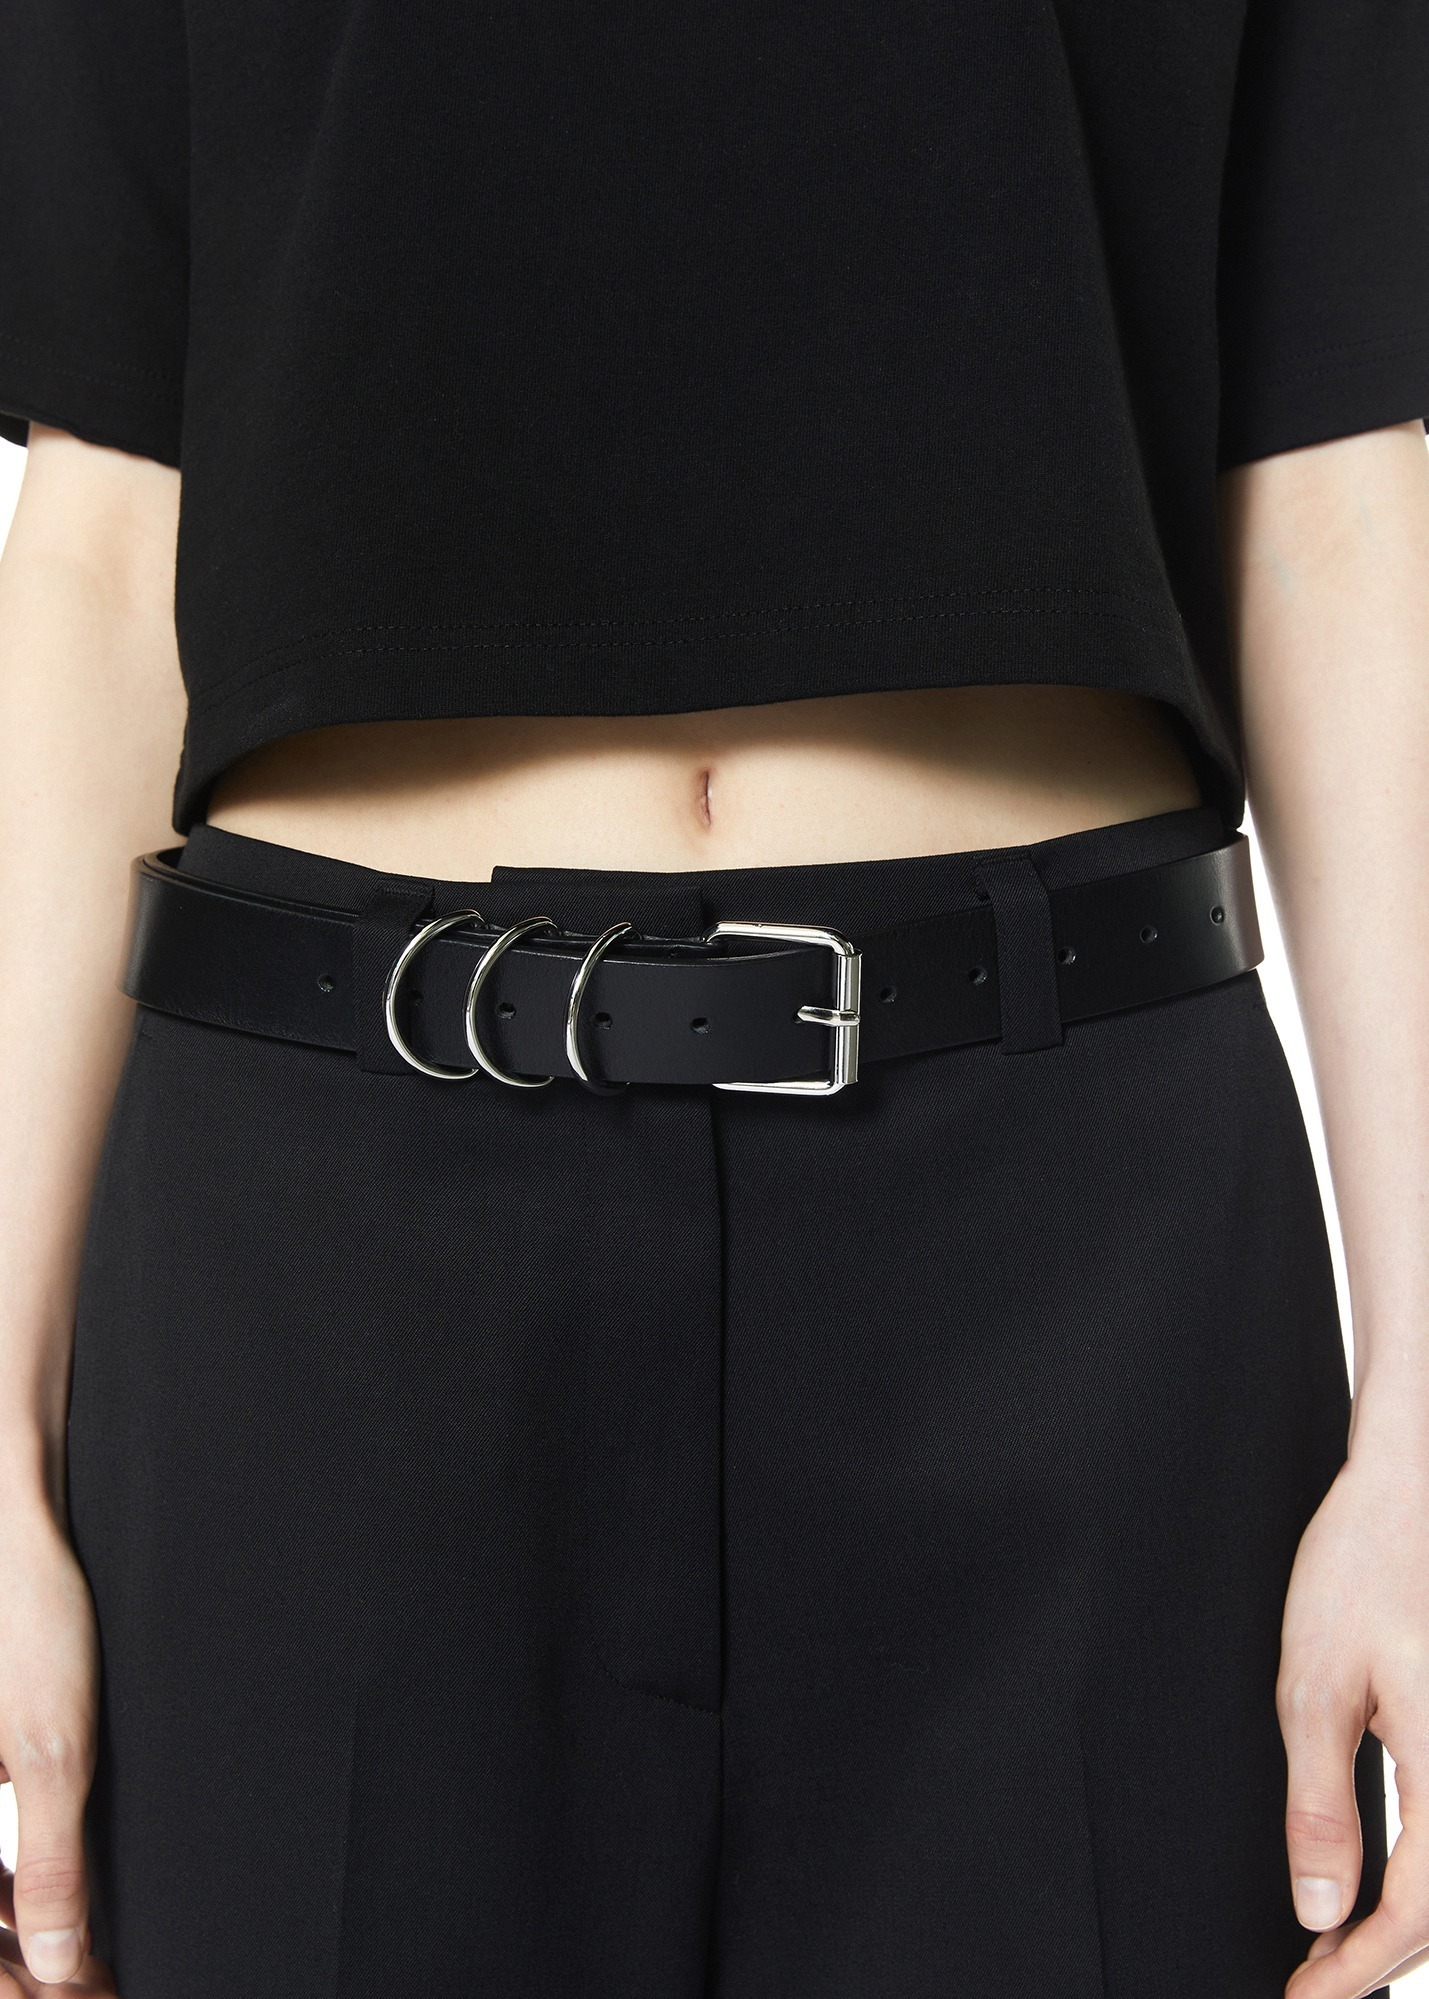 [4TH REORDER] SQUARE BUCKLE LEATHER BELT BLACK